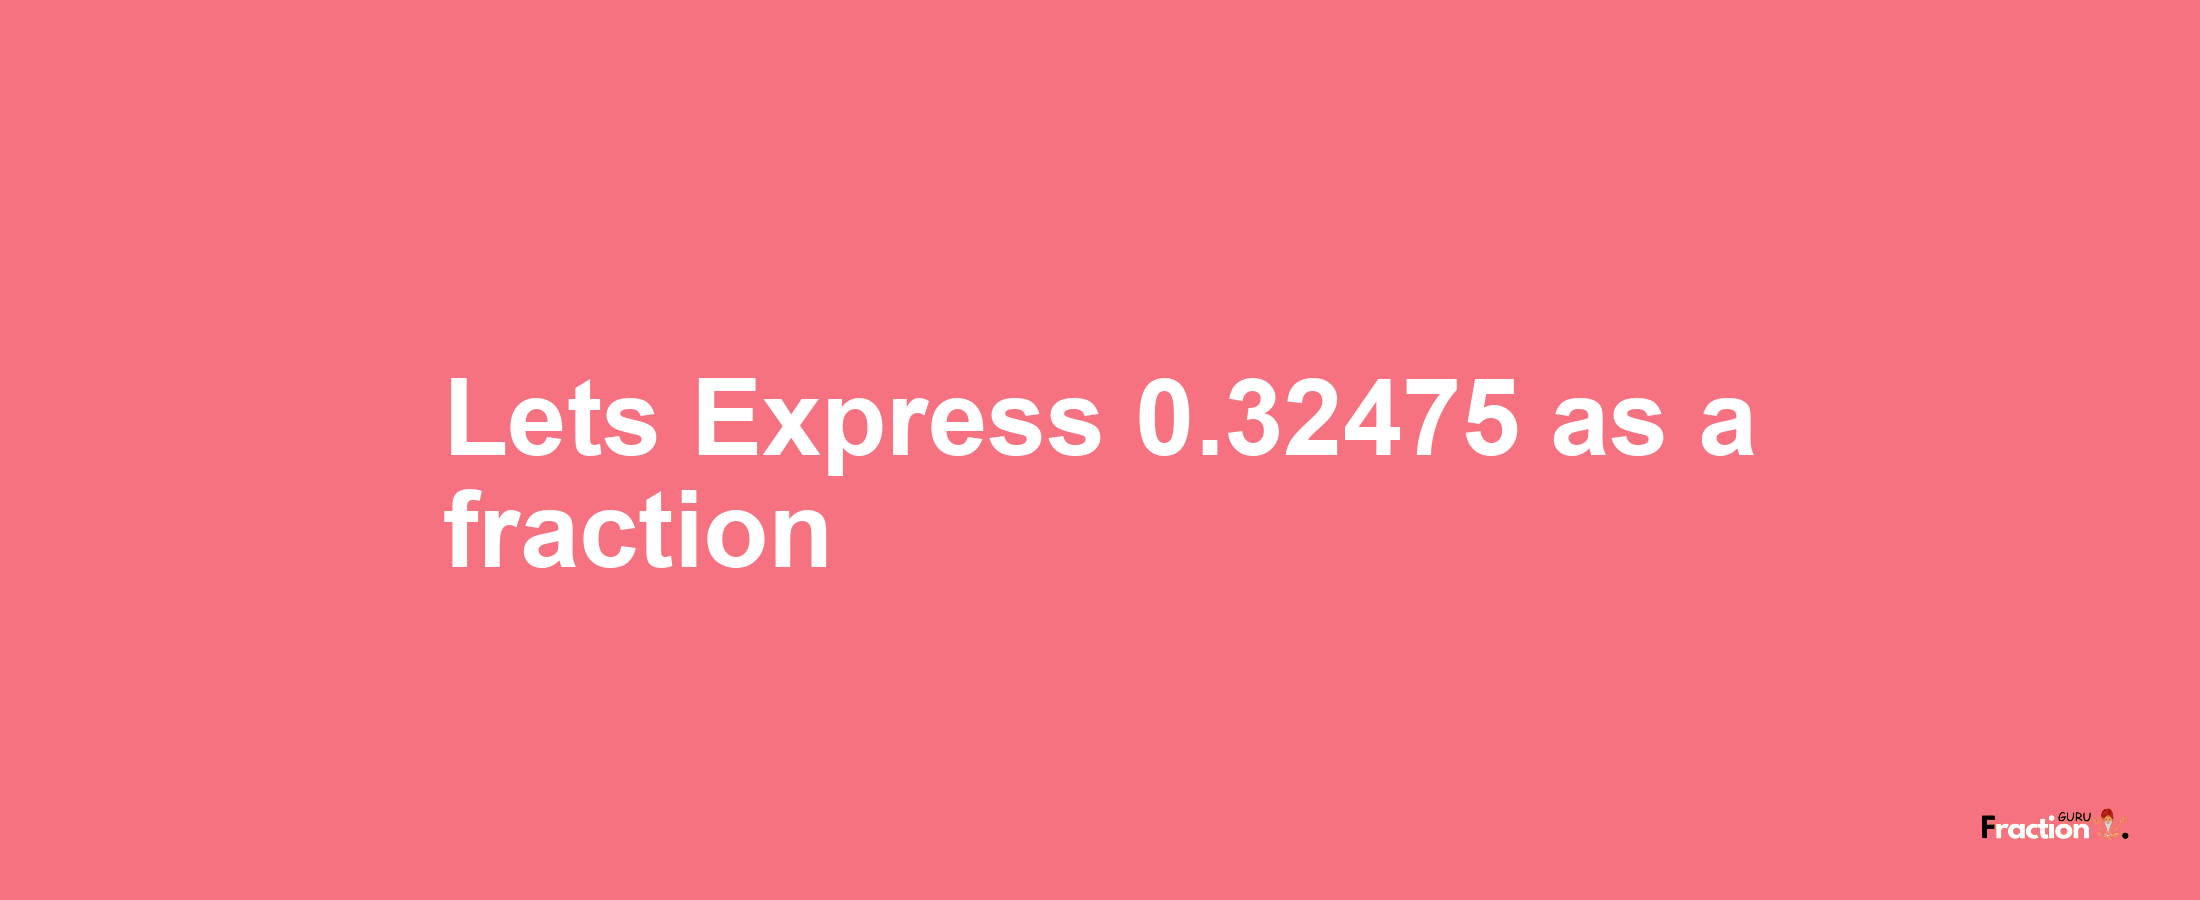 Lets Express 0.32475 as afraction